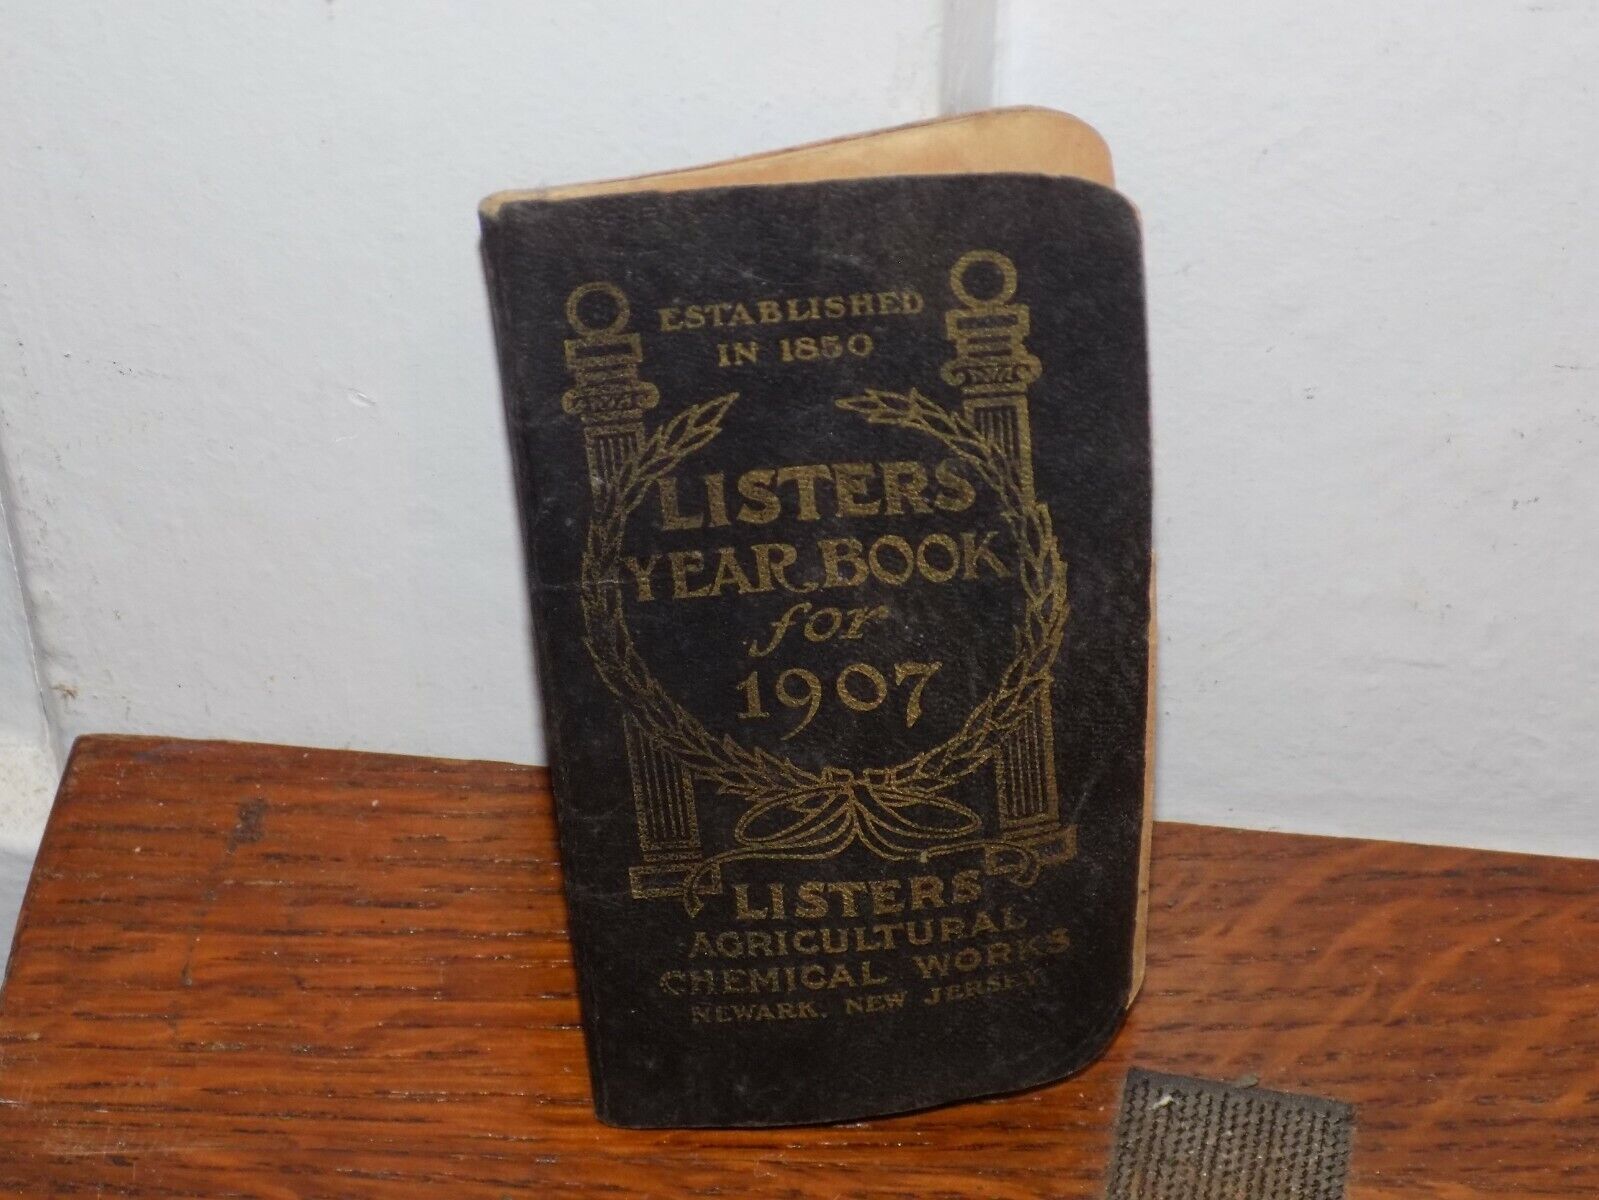 Vintage Listers Agricultural Chemical Works Year Book for 1907